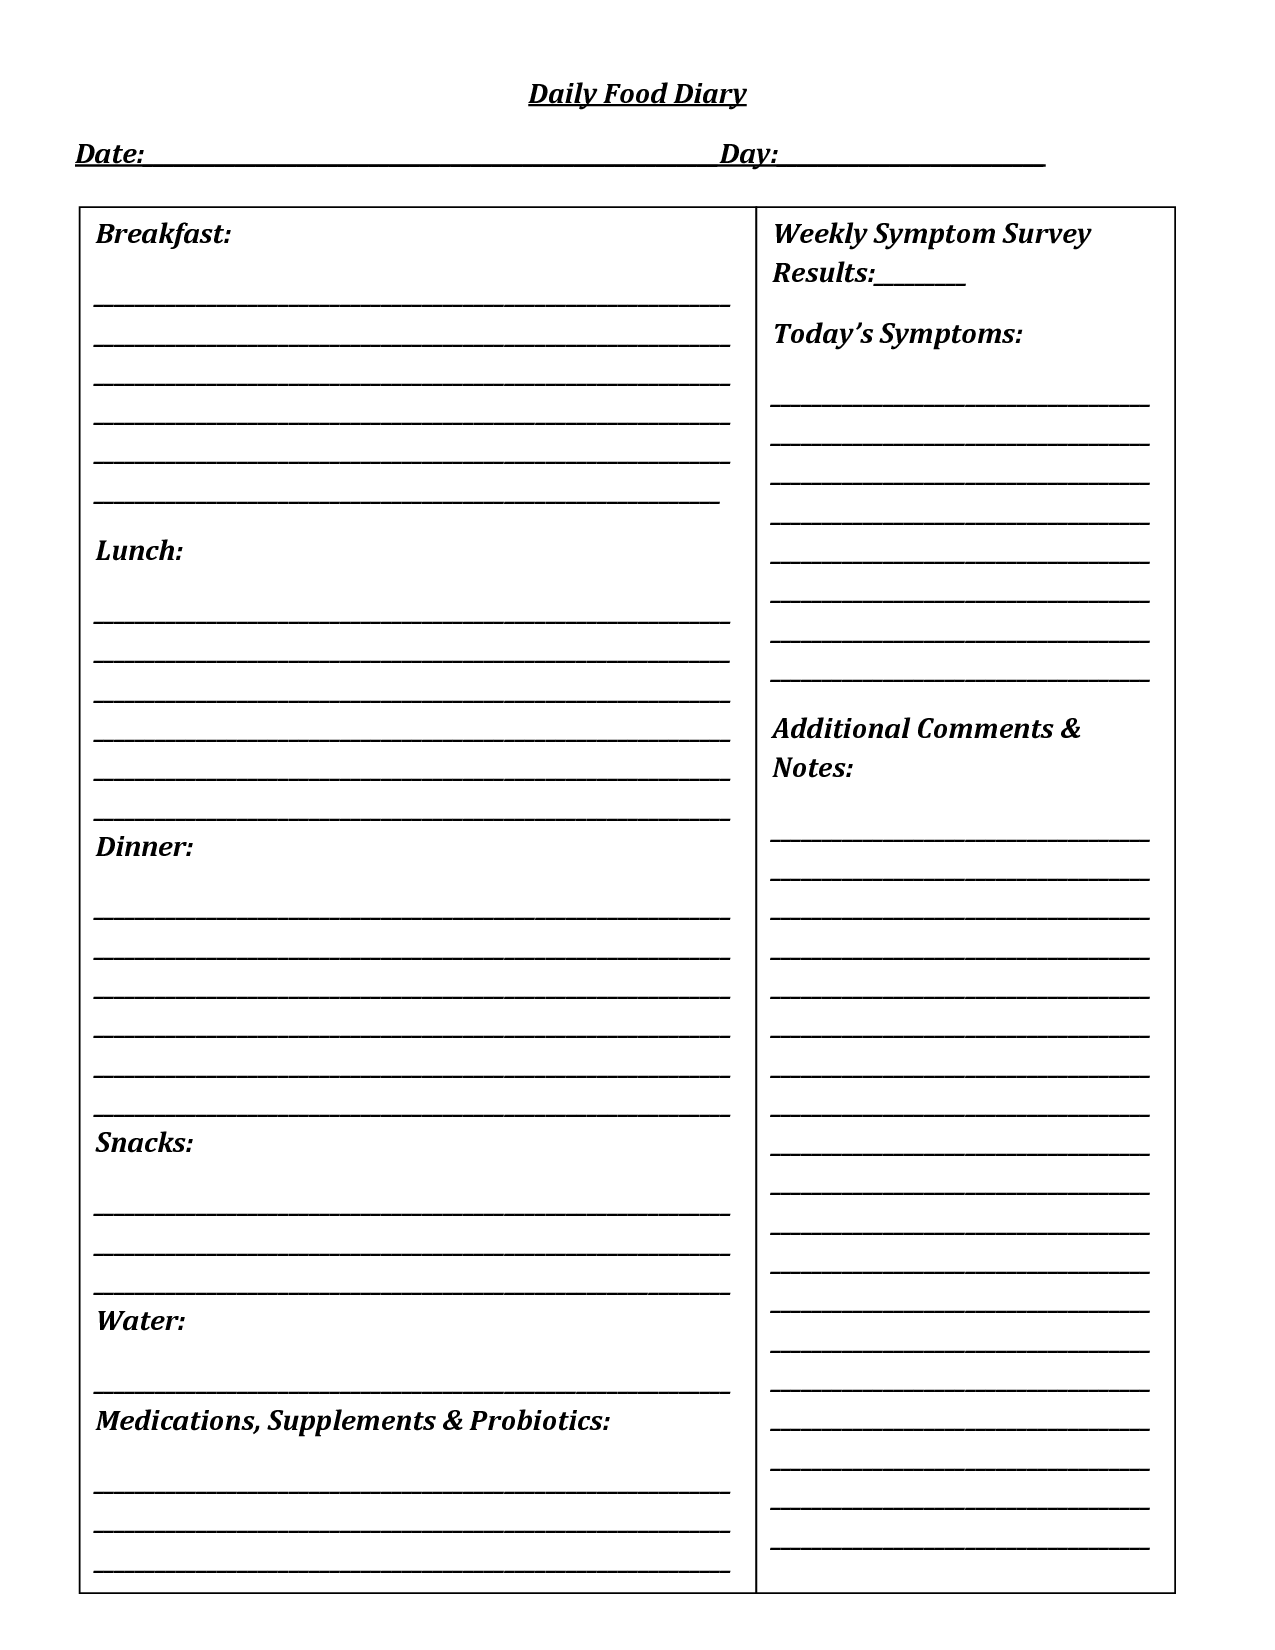 Daily Journal Printable Free